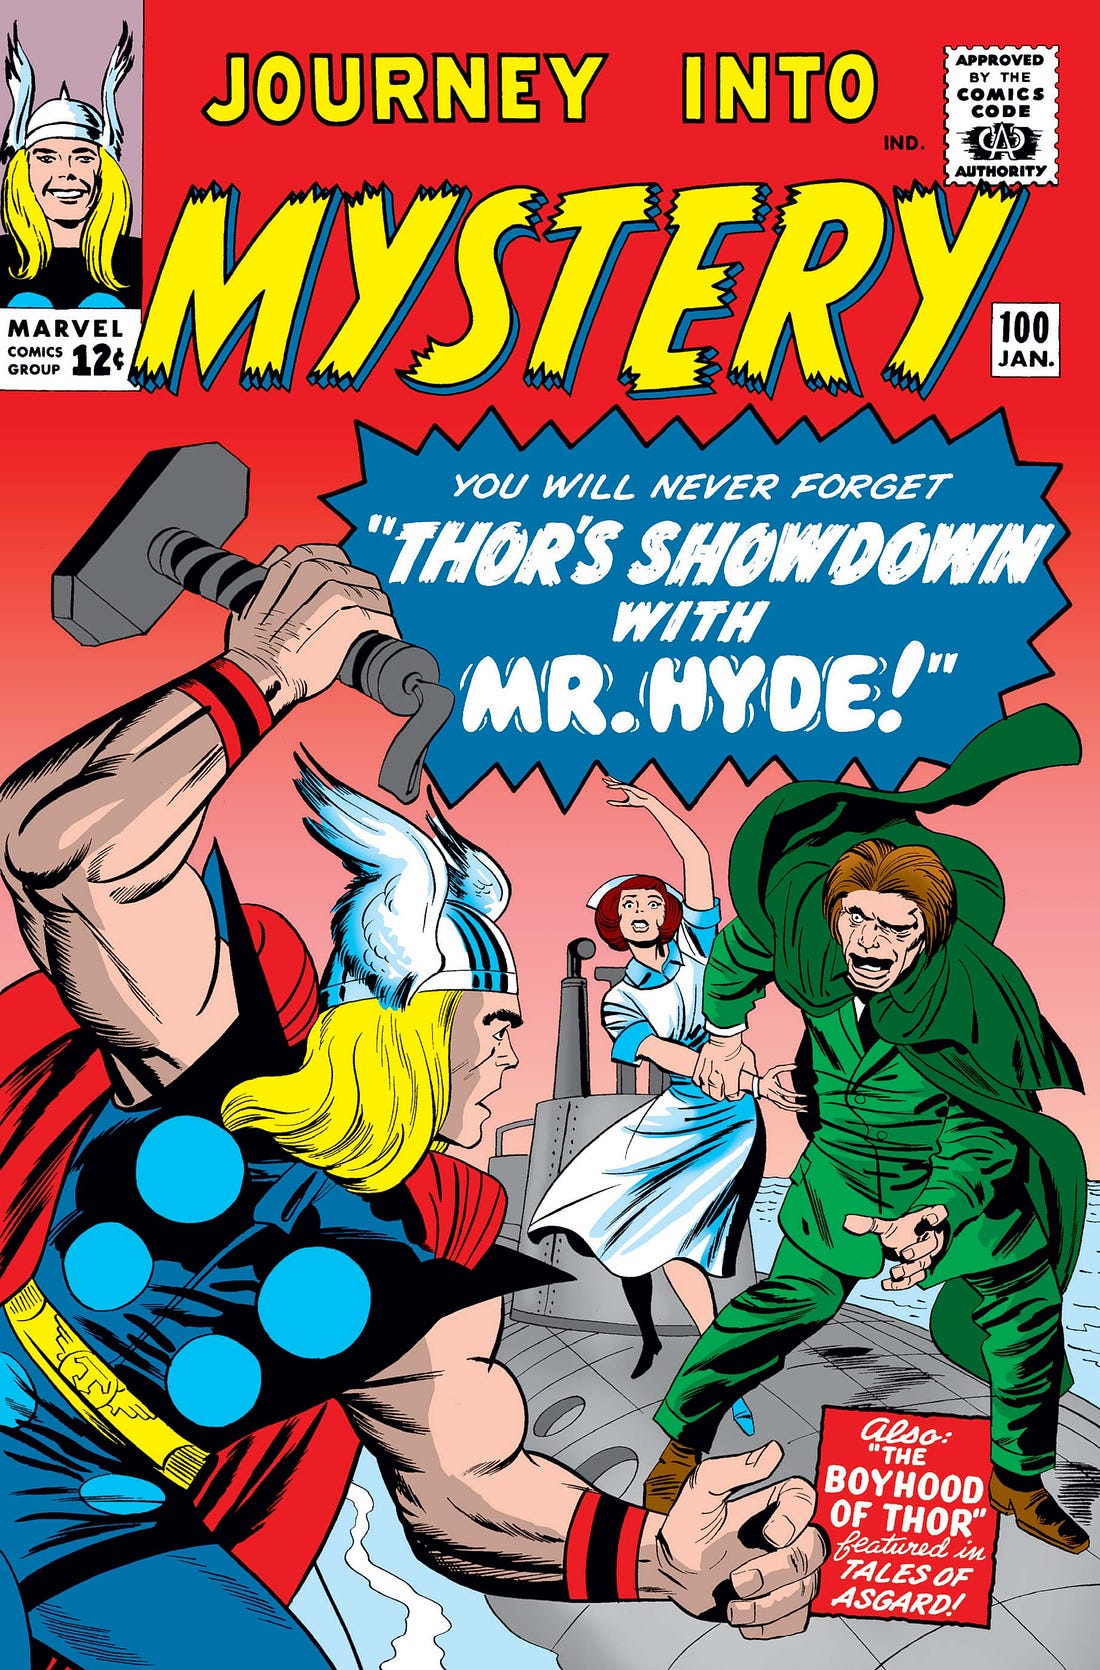 Journey Into Mystery (1952) #100 | Comic Issues | Marvel